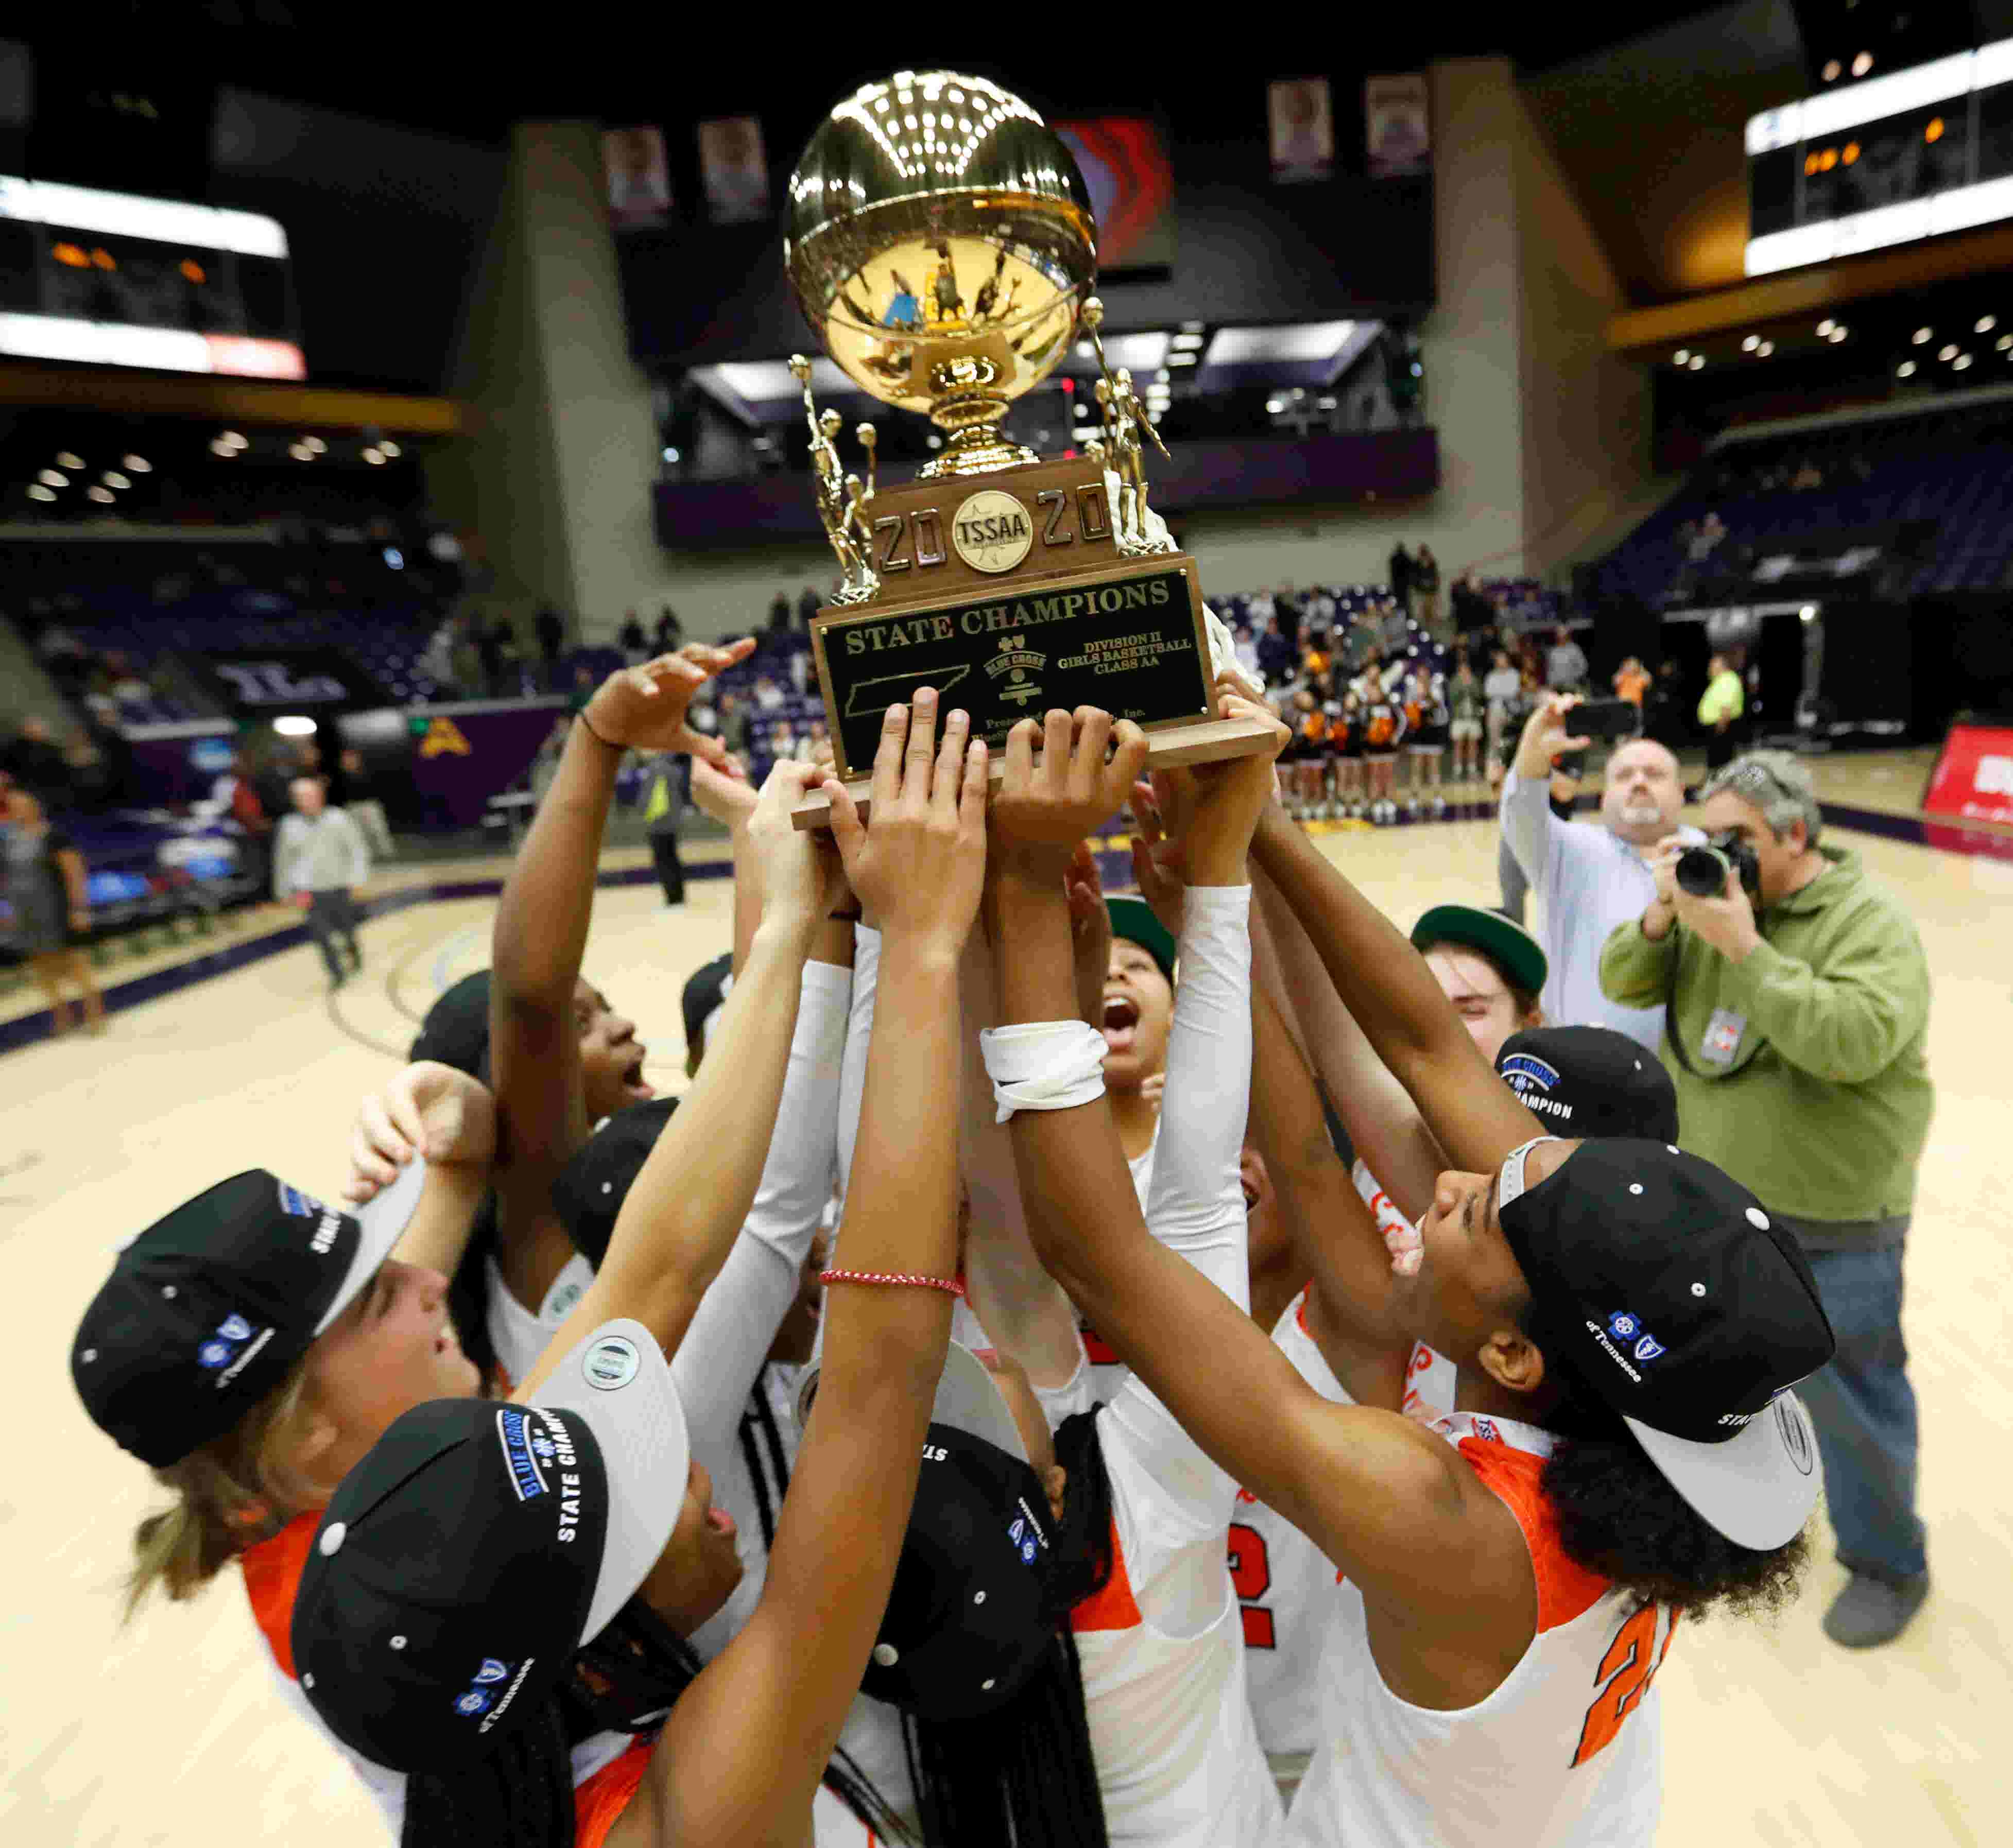 Watch all four TSSAA Division II basketball state champions celebrate